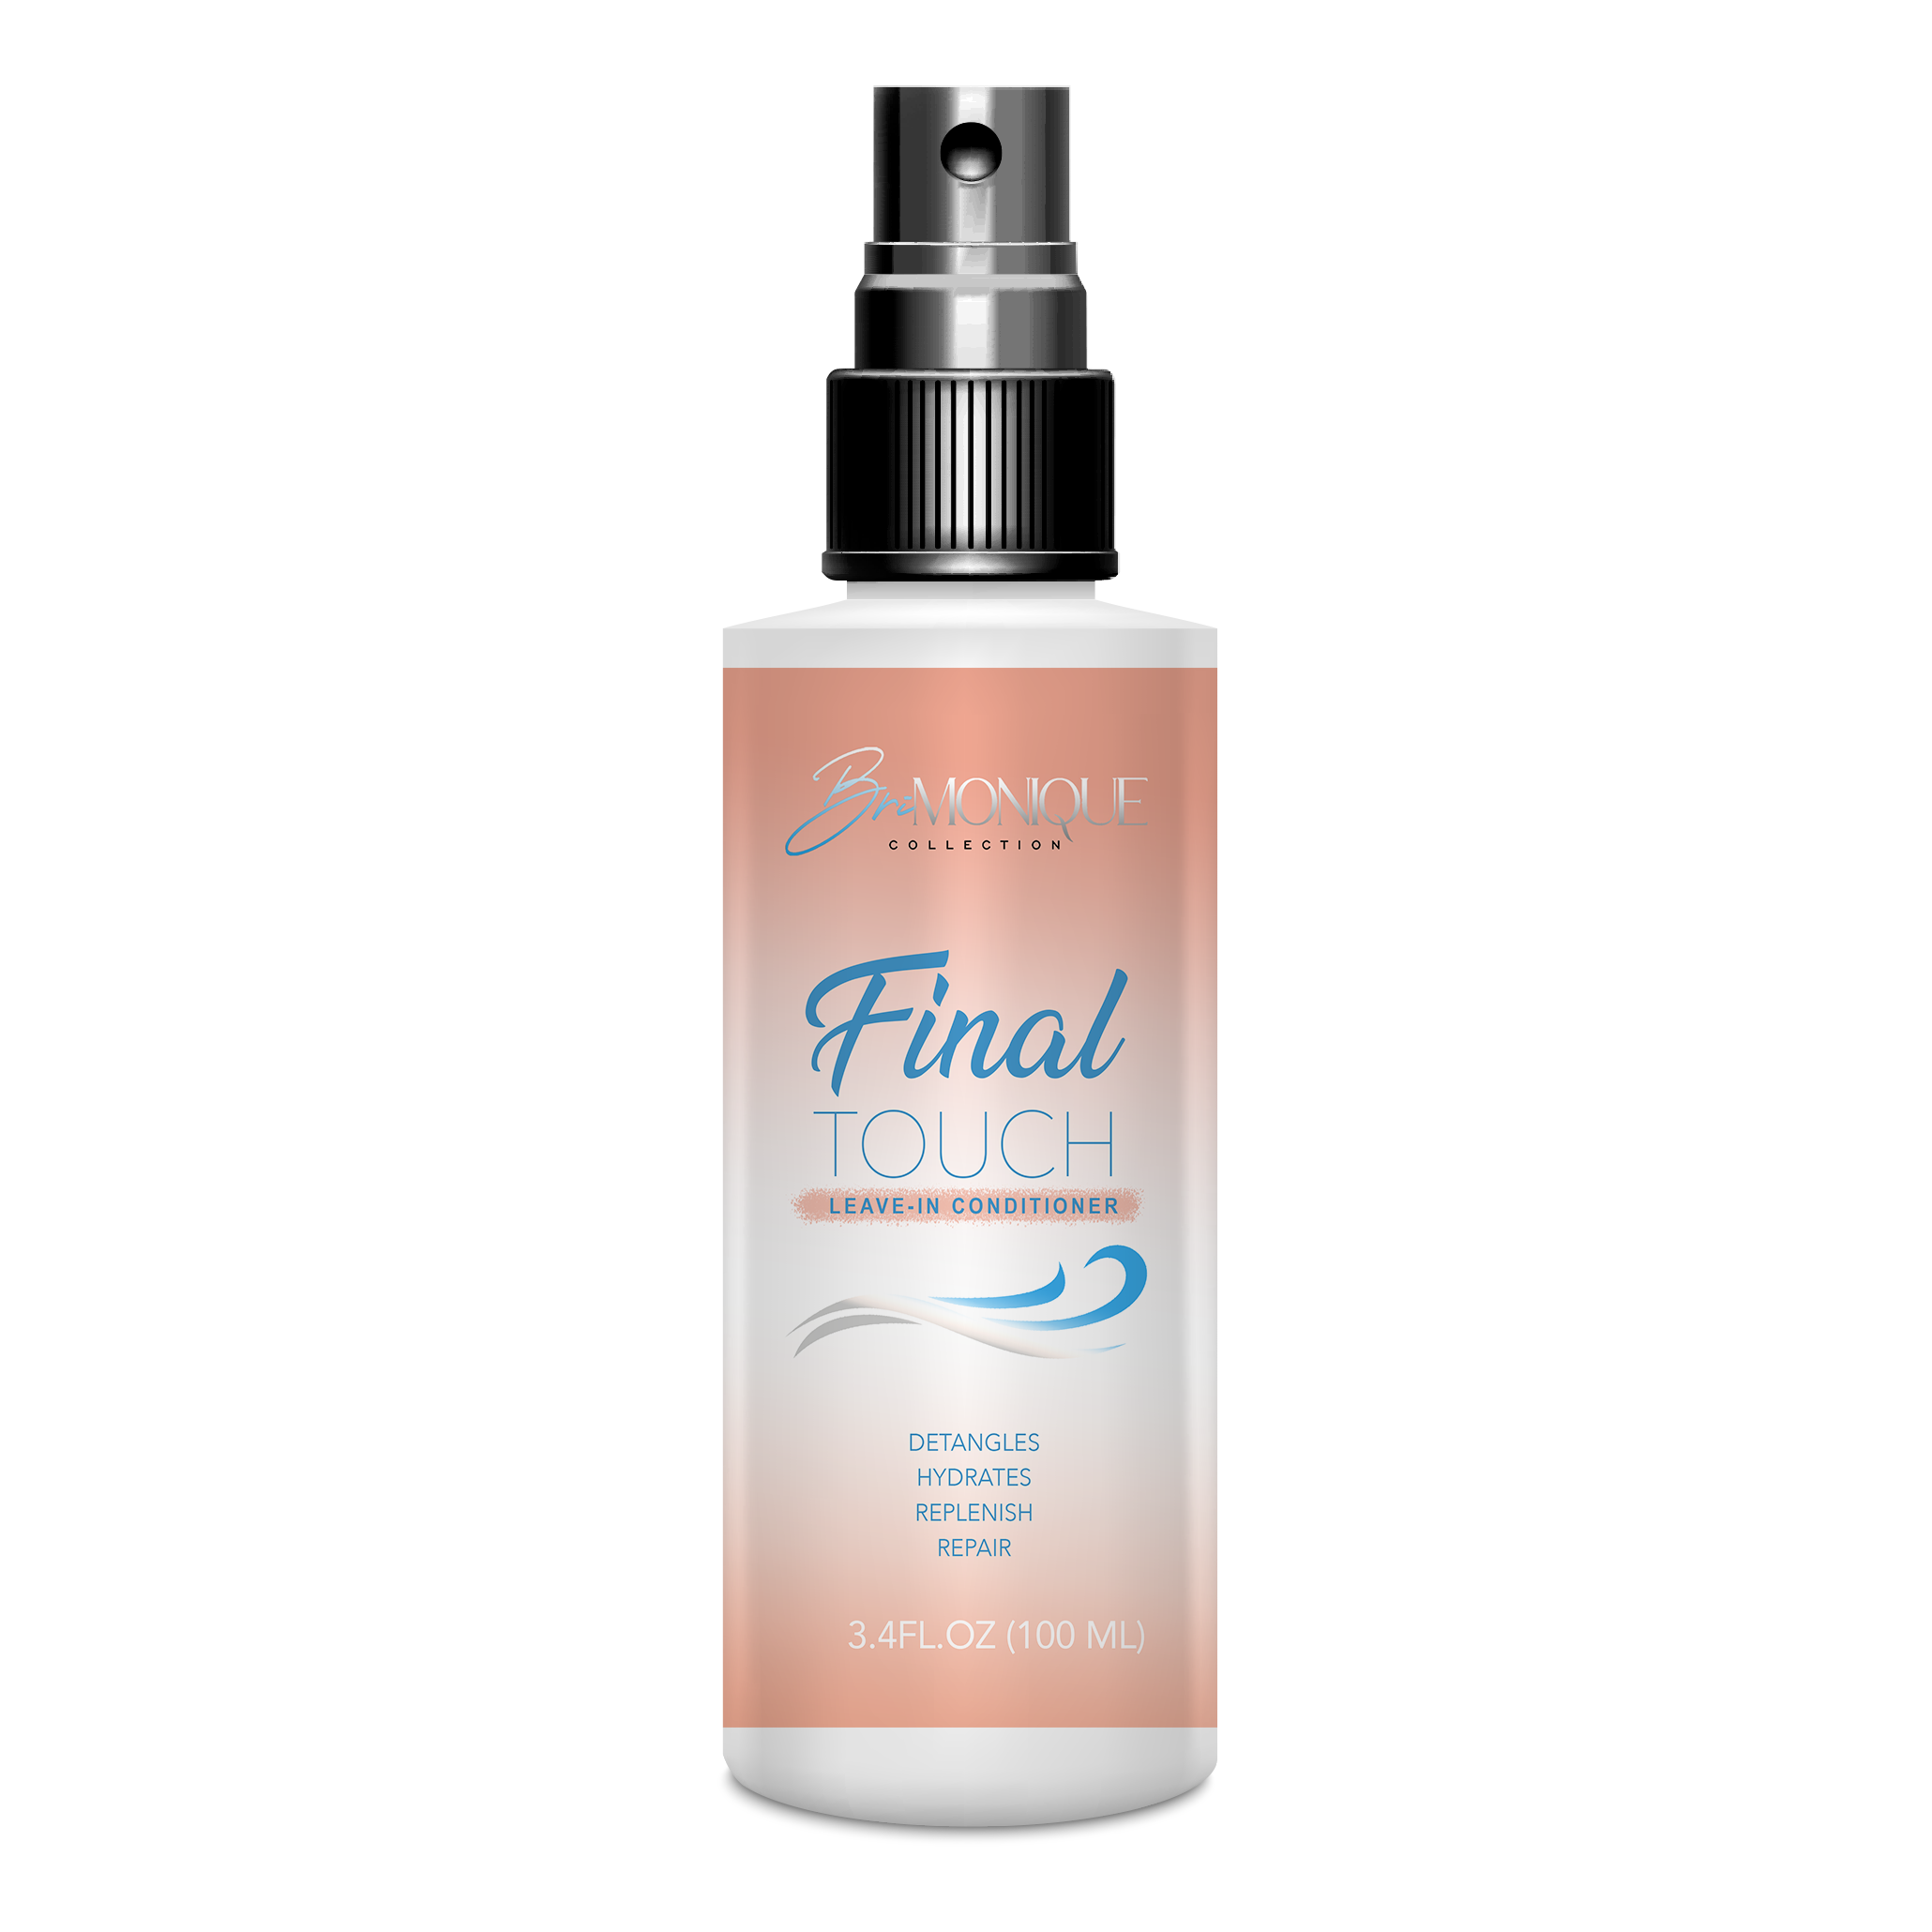 Final Touch Leave-IN Conditioner